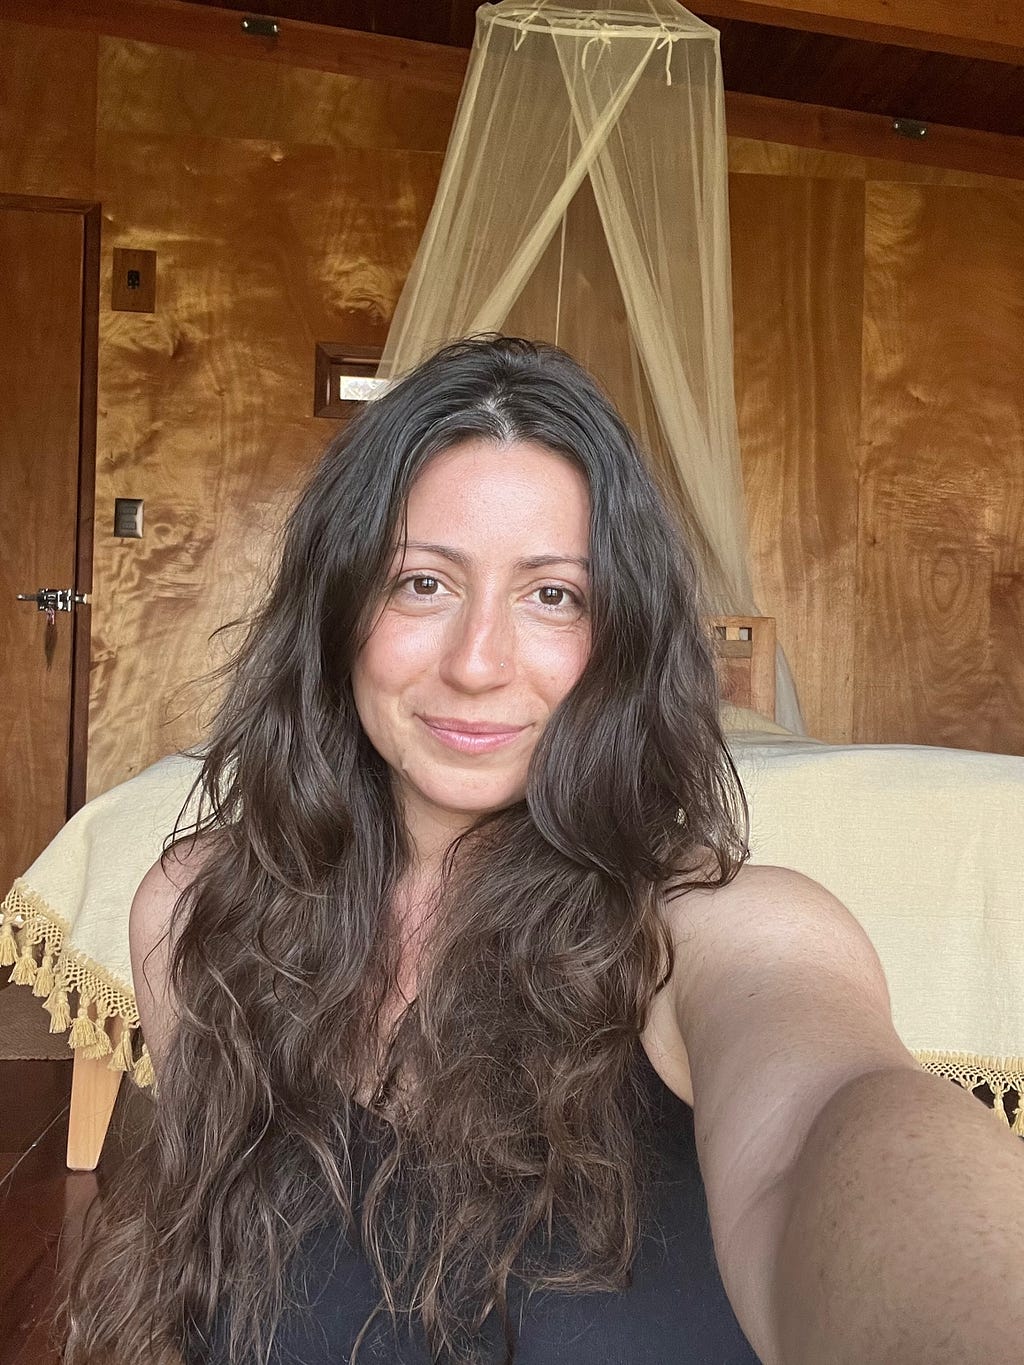 White woman with long brown hair, sun-browned skin smiling in a cabin. Shiny wood panels, a white mosquito net and a soft yellow bedspread are seen in the background.